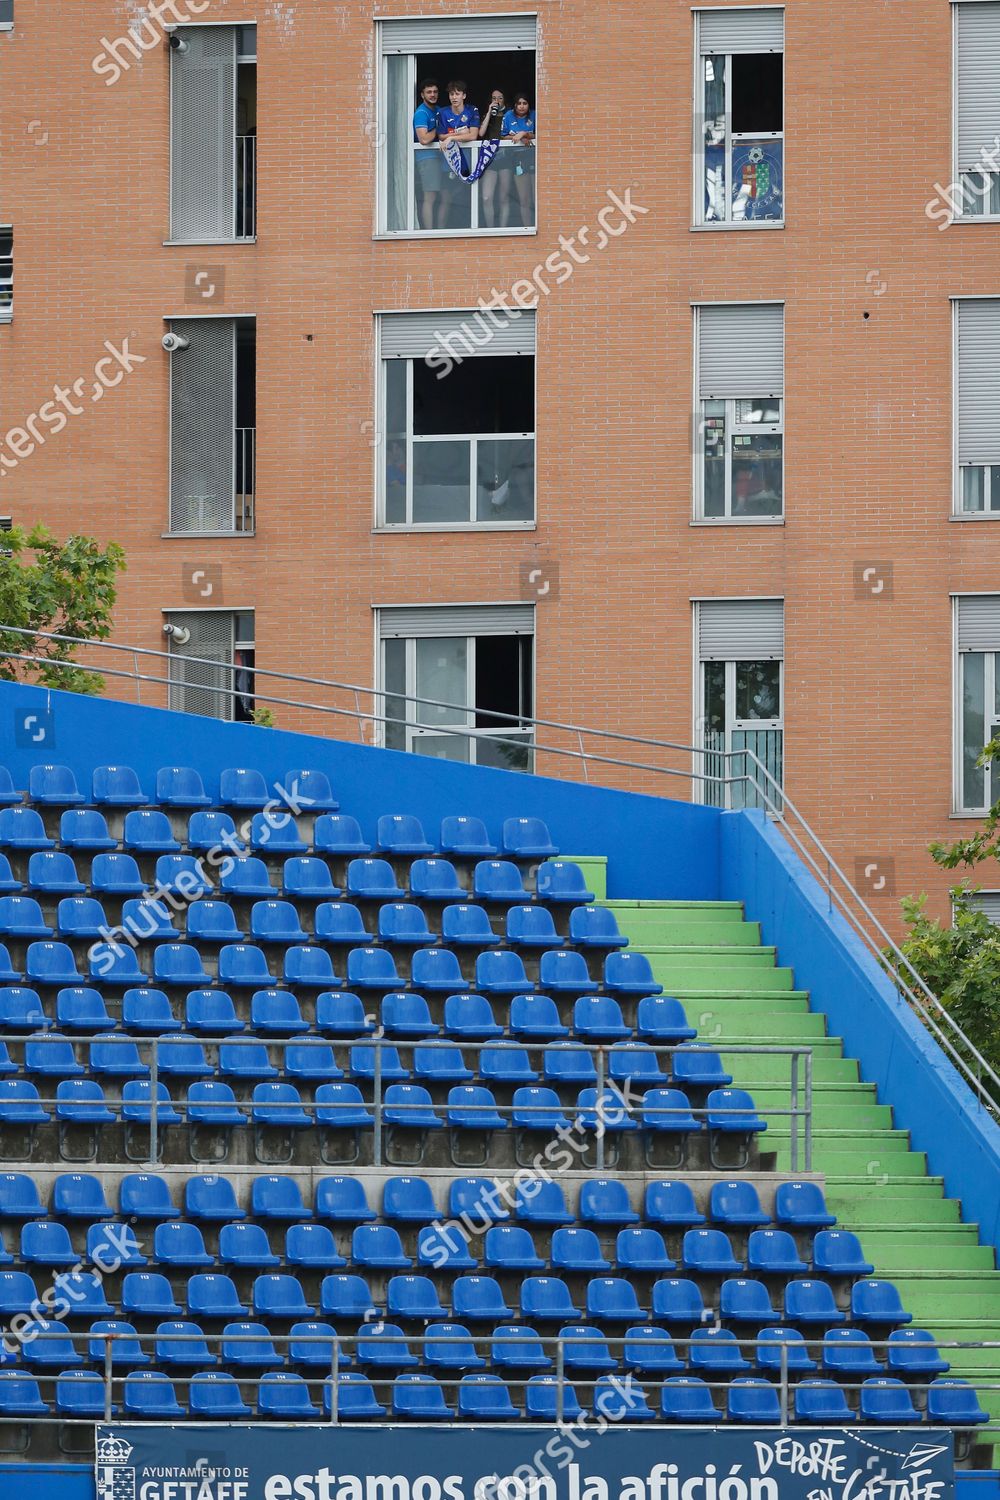 Getafe Fans Watch Unattended Game Apartment Next Editorial Stock Photo Stock Image Shutterstock